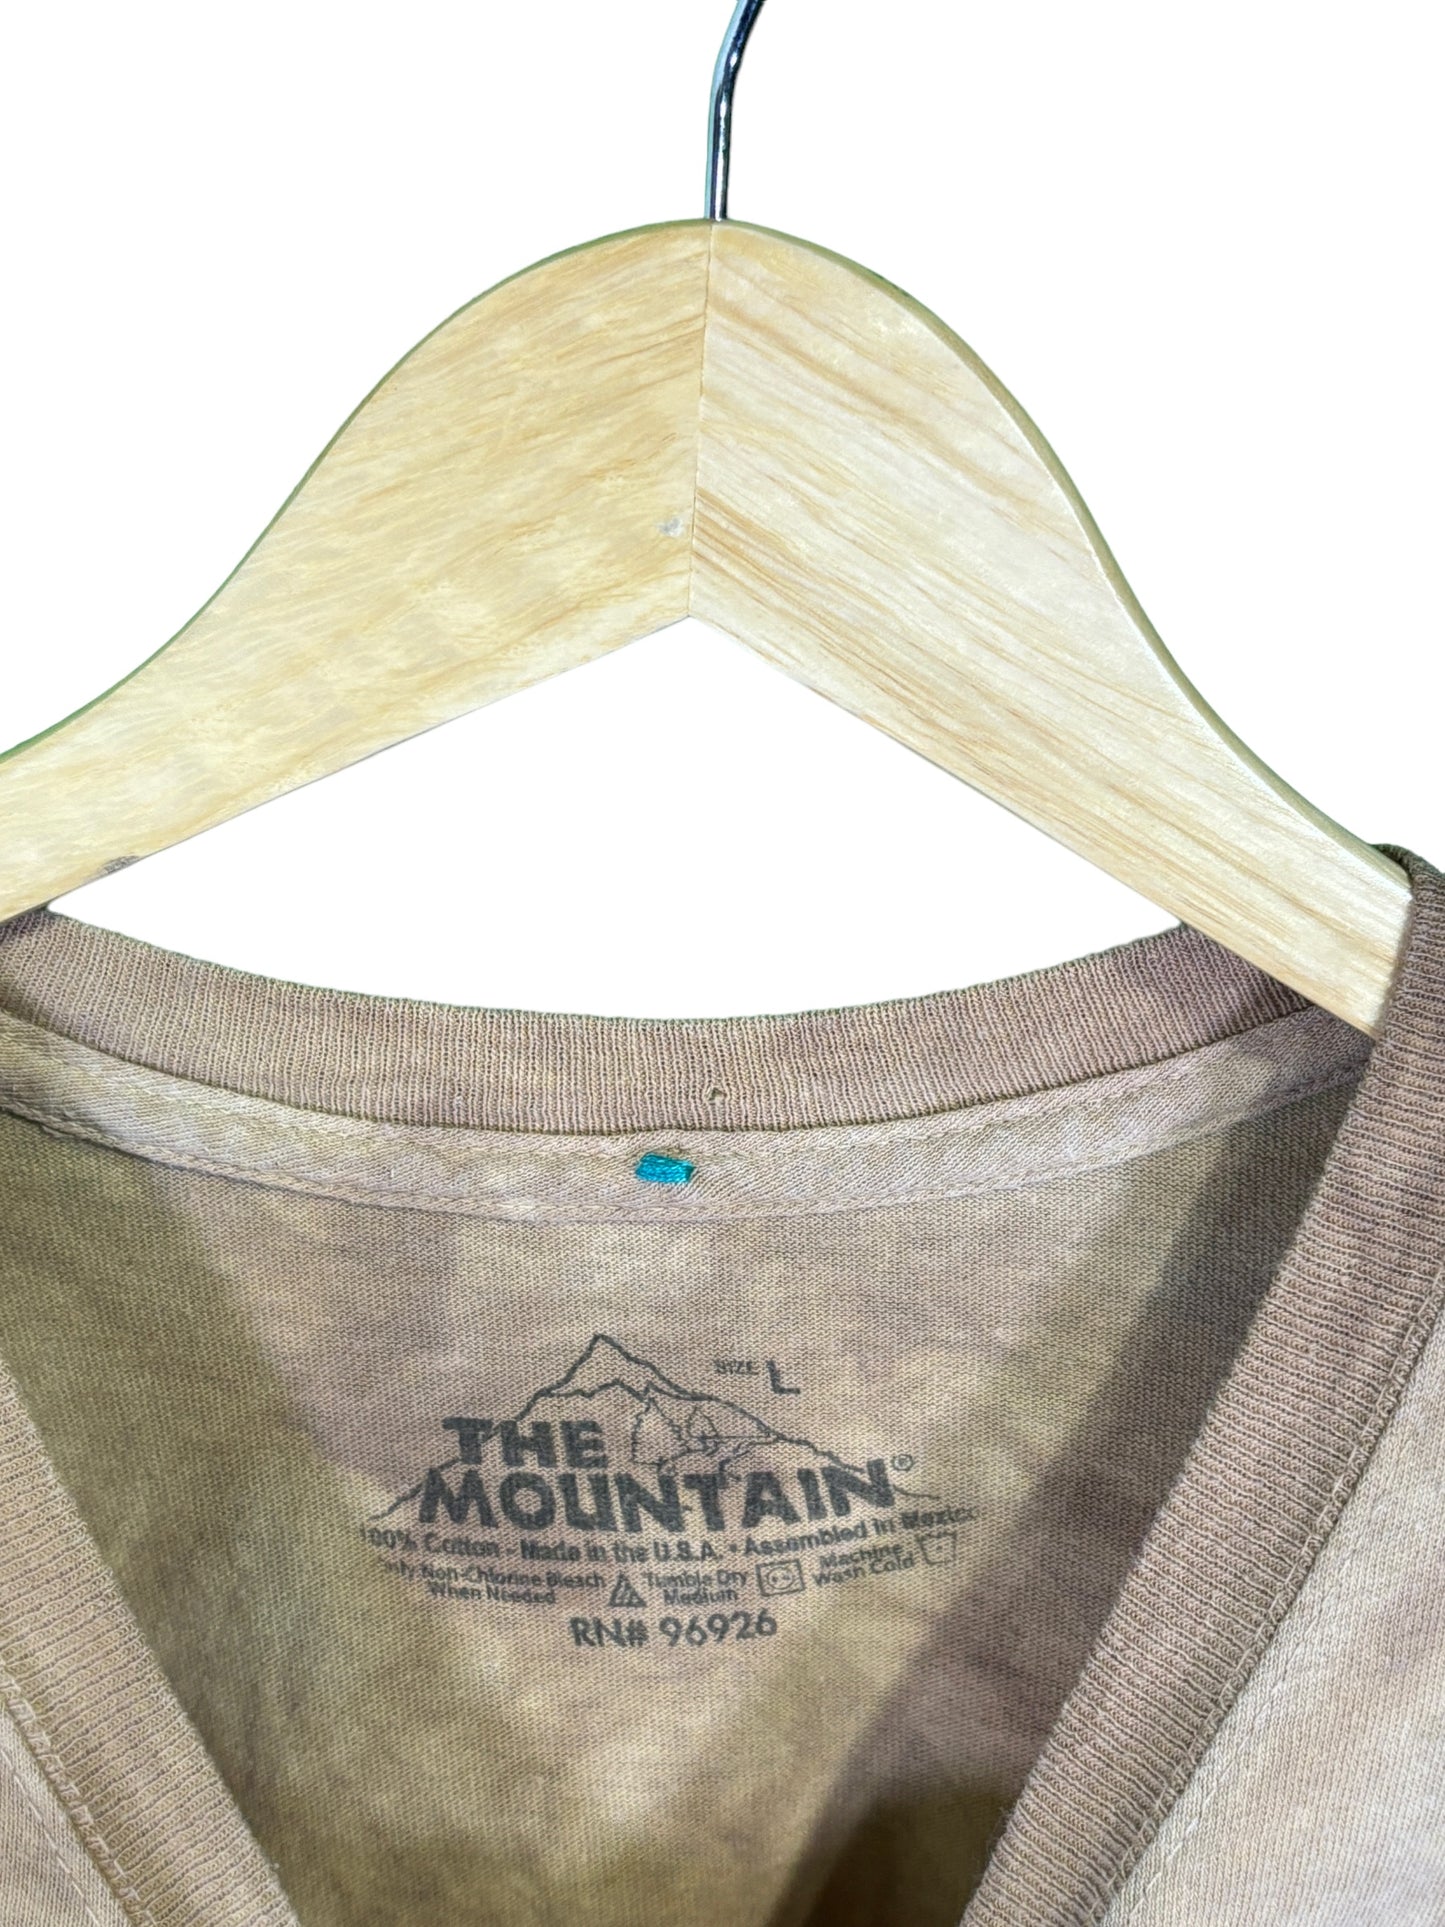 Vintage The Mountain Big Print Horses Running Nature Graphic Tee Size Large